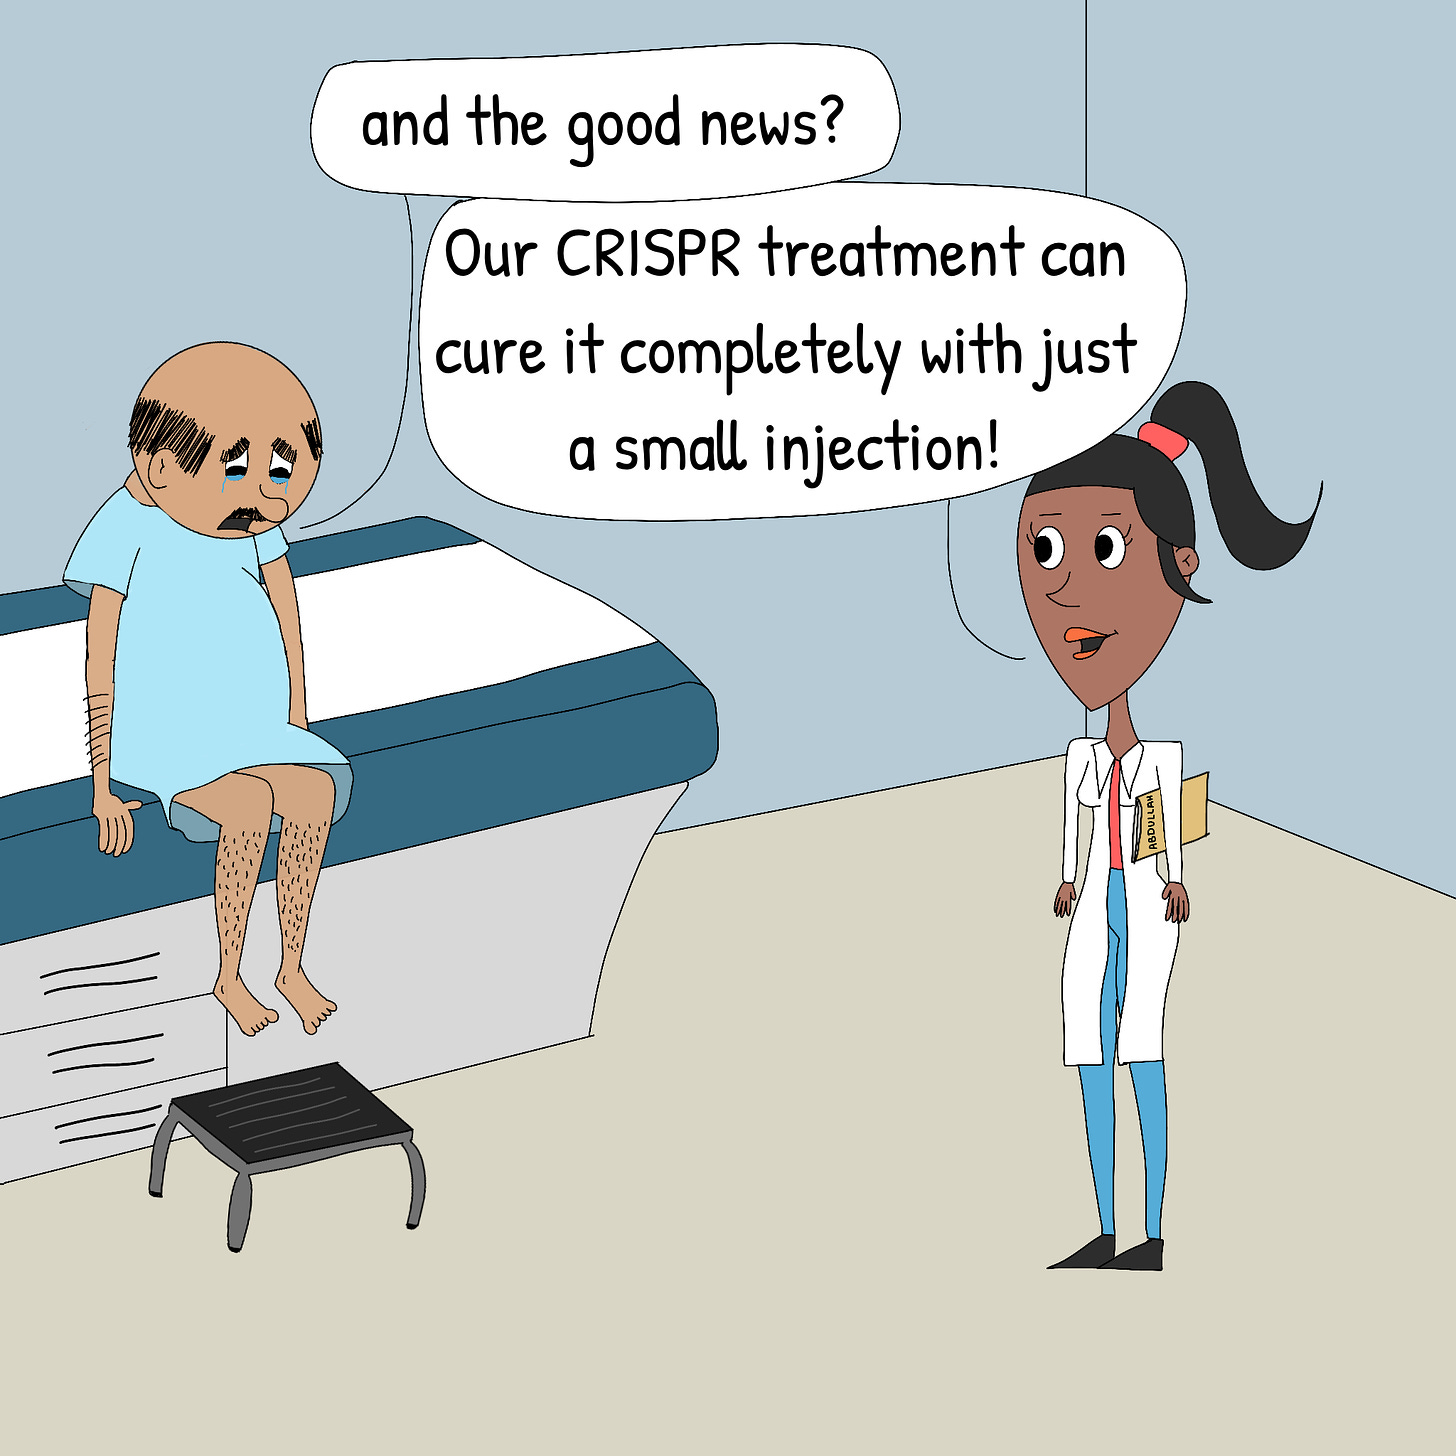 Panel 4: Looking down with tears filling his eyes, Mr. Abdullah asks: "and the good news?". Tori responds: "Our CRISPR treatment can cure it completely with just a small injection!"